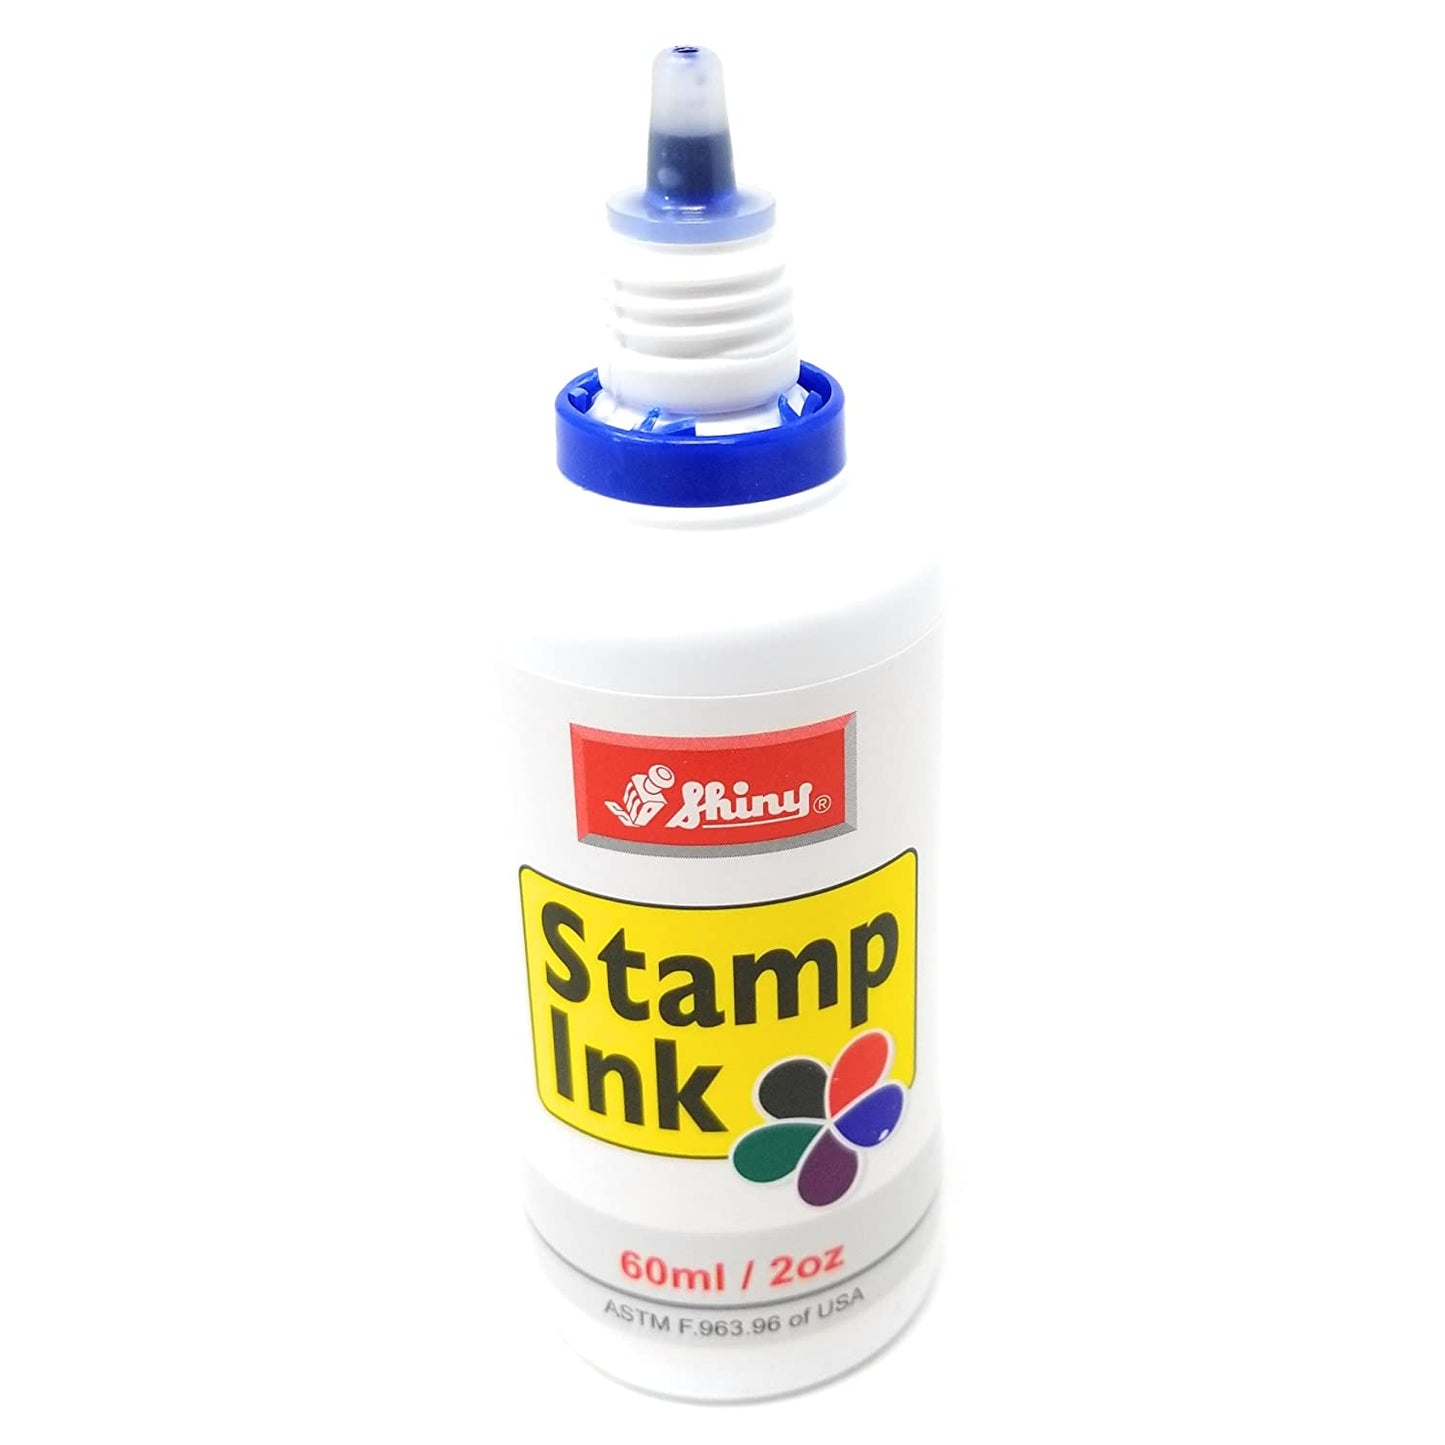 Refill Ink For All Notary VA Stamps & Embossers